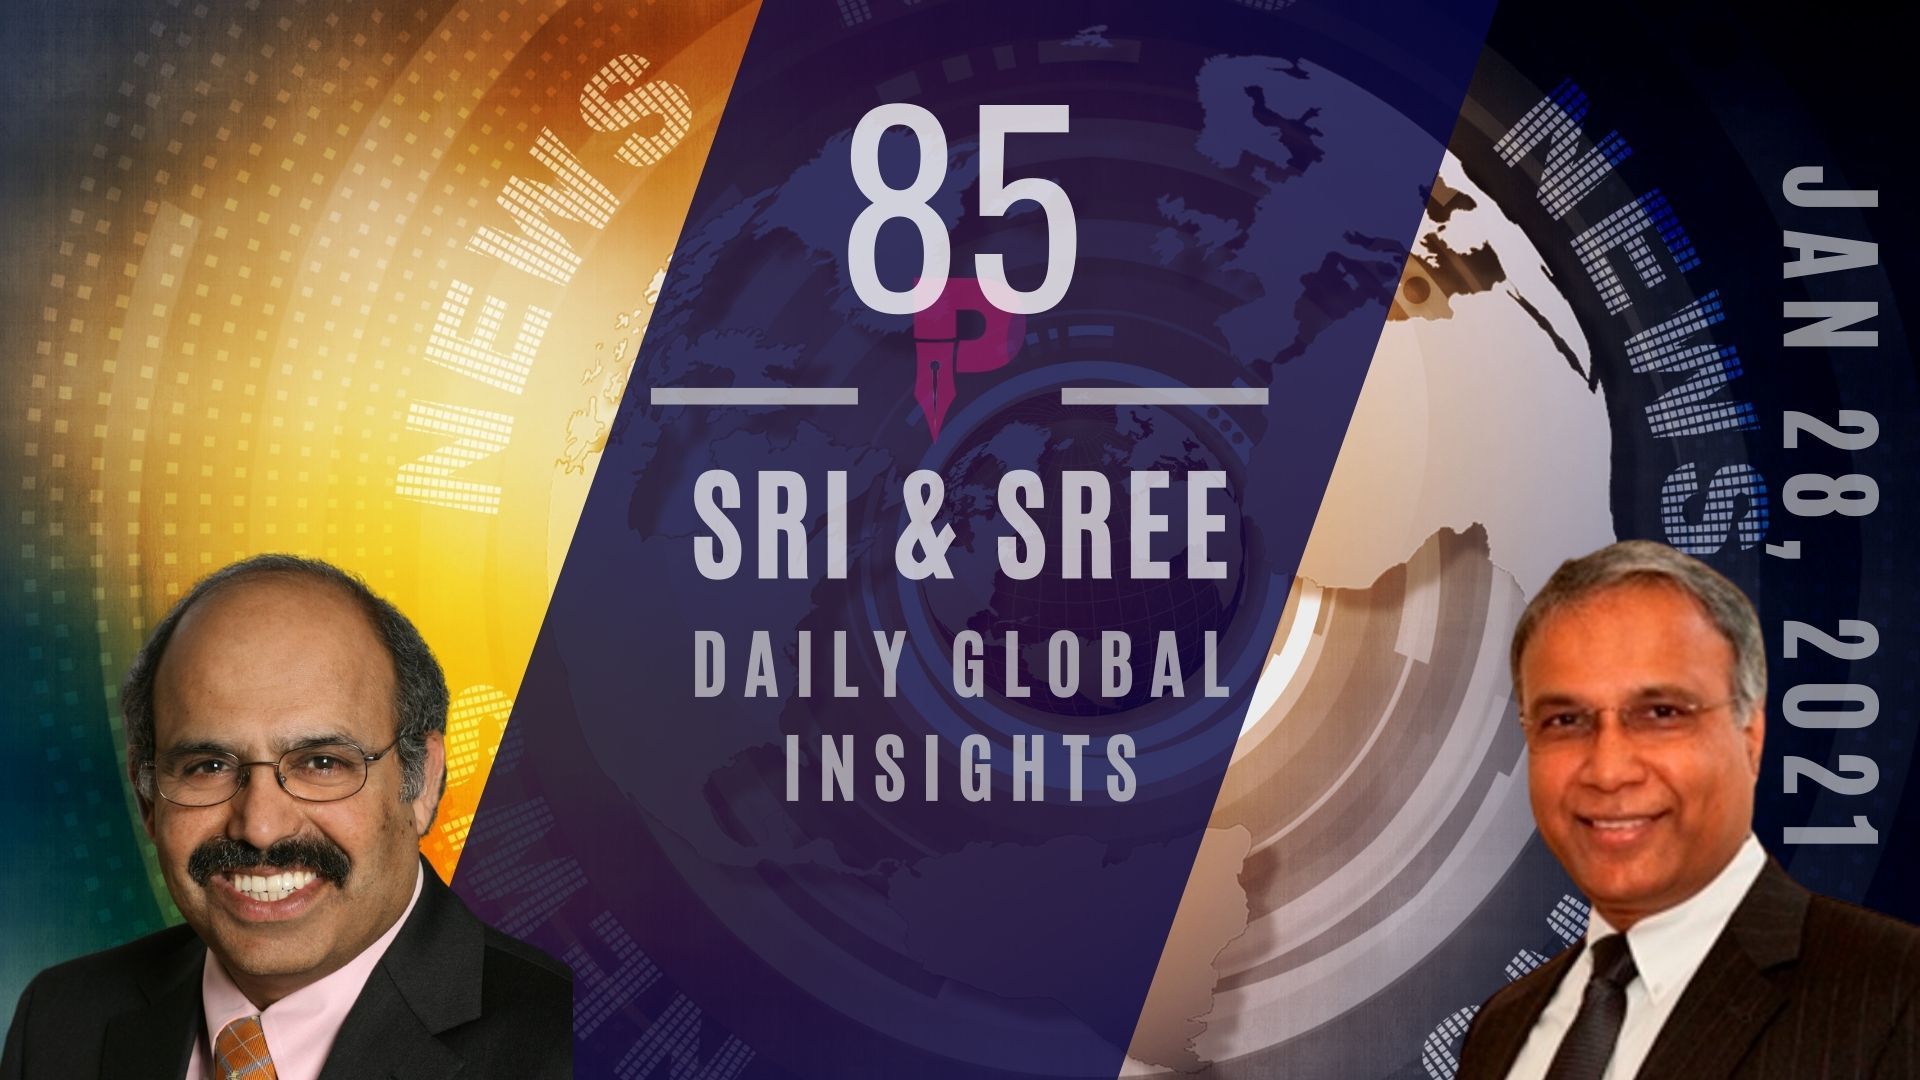 #DailyGlobalInsights #EP85 Dems to move to create DC as 51st state. US to support Japan in Senkoku. PRC to annex Pratas islands near Taiwan?